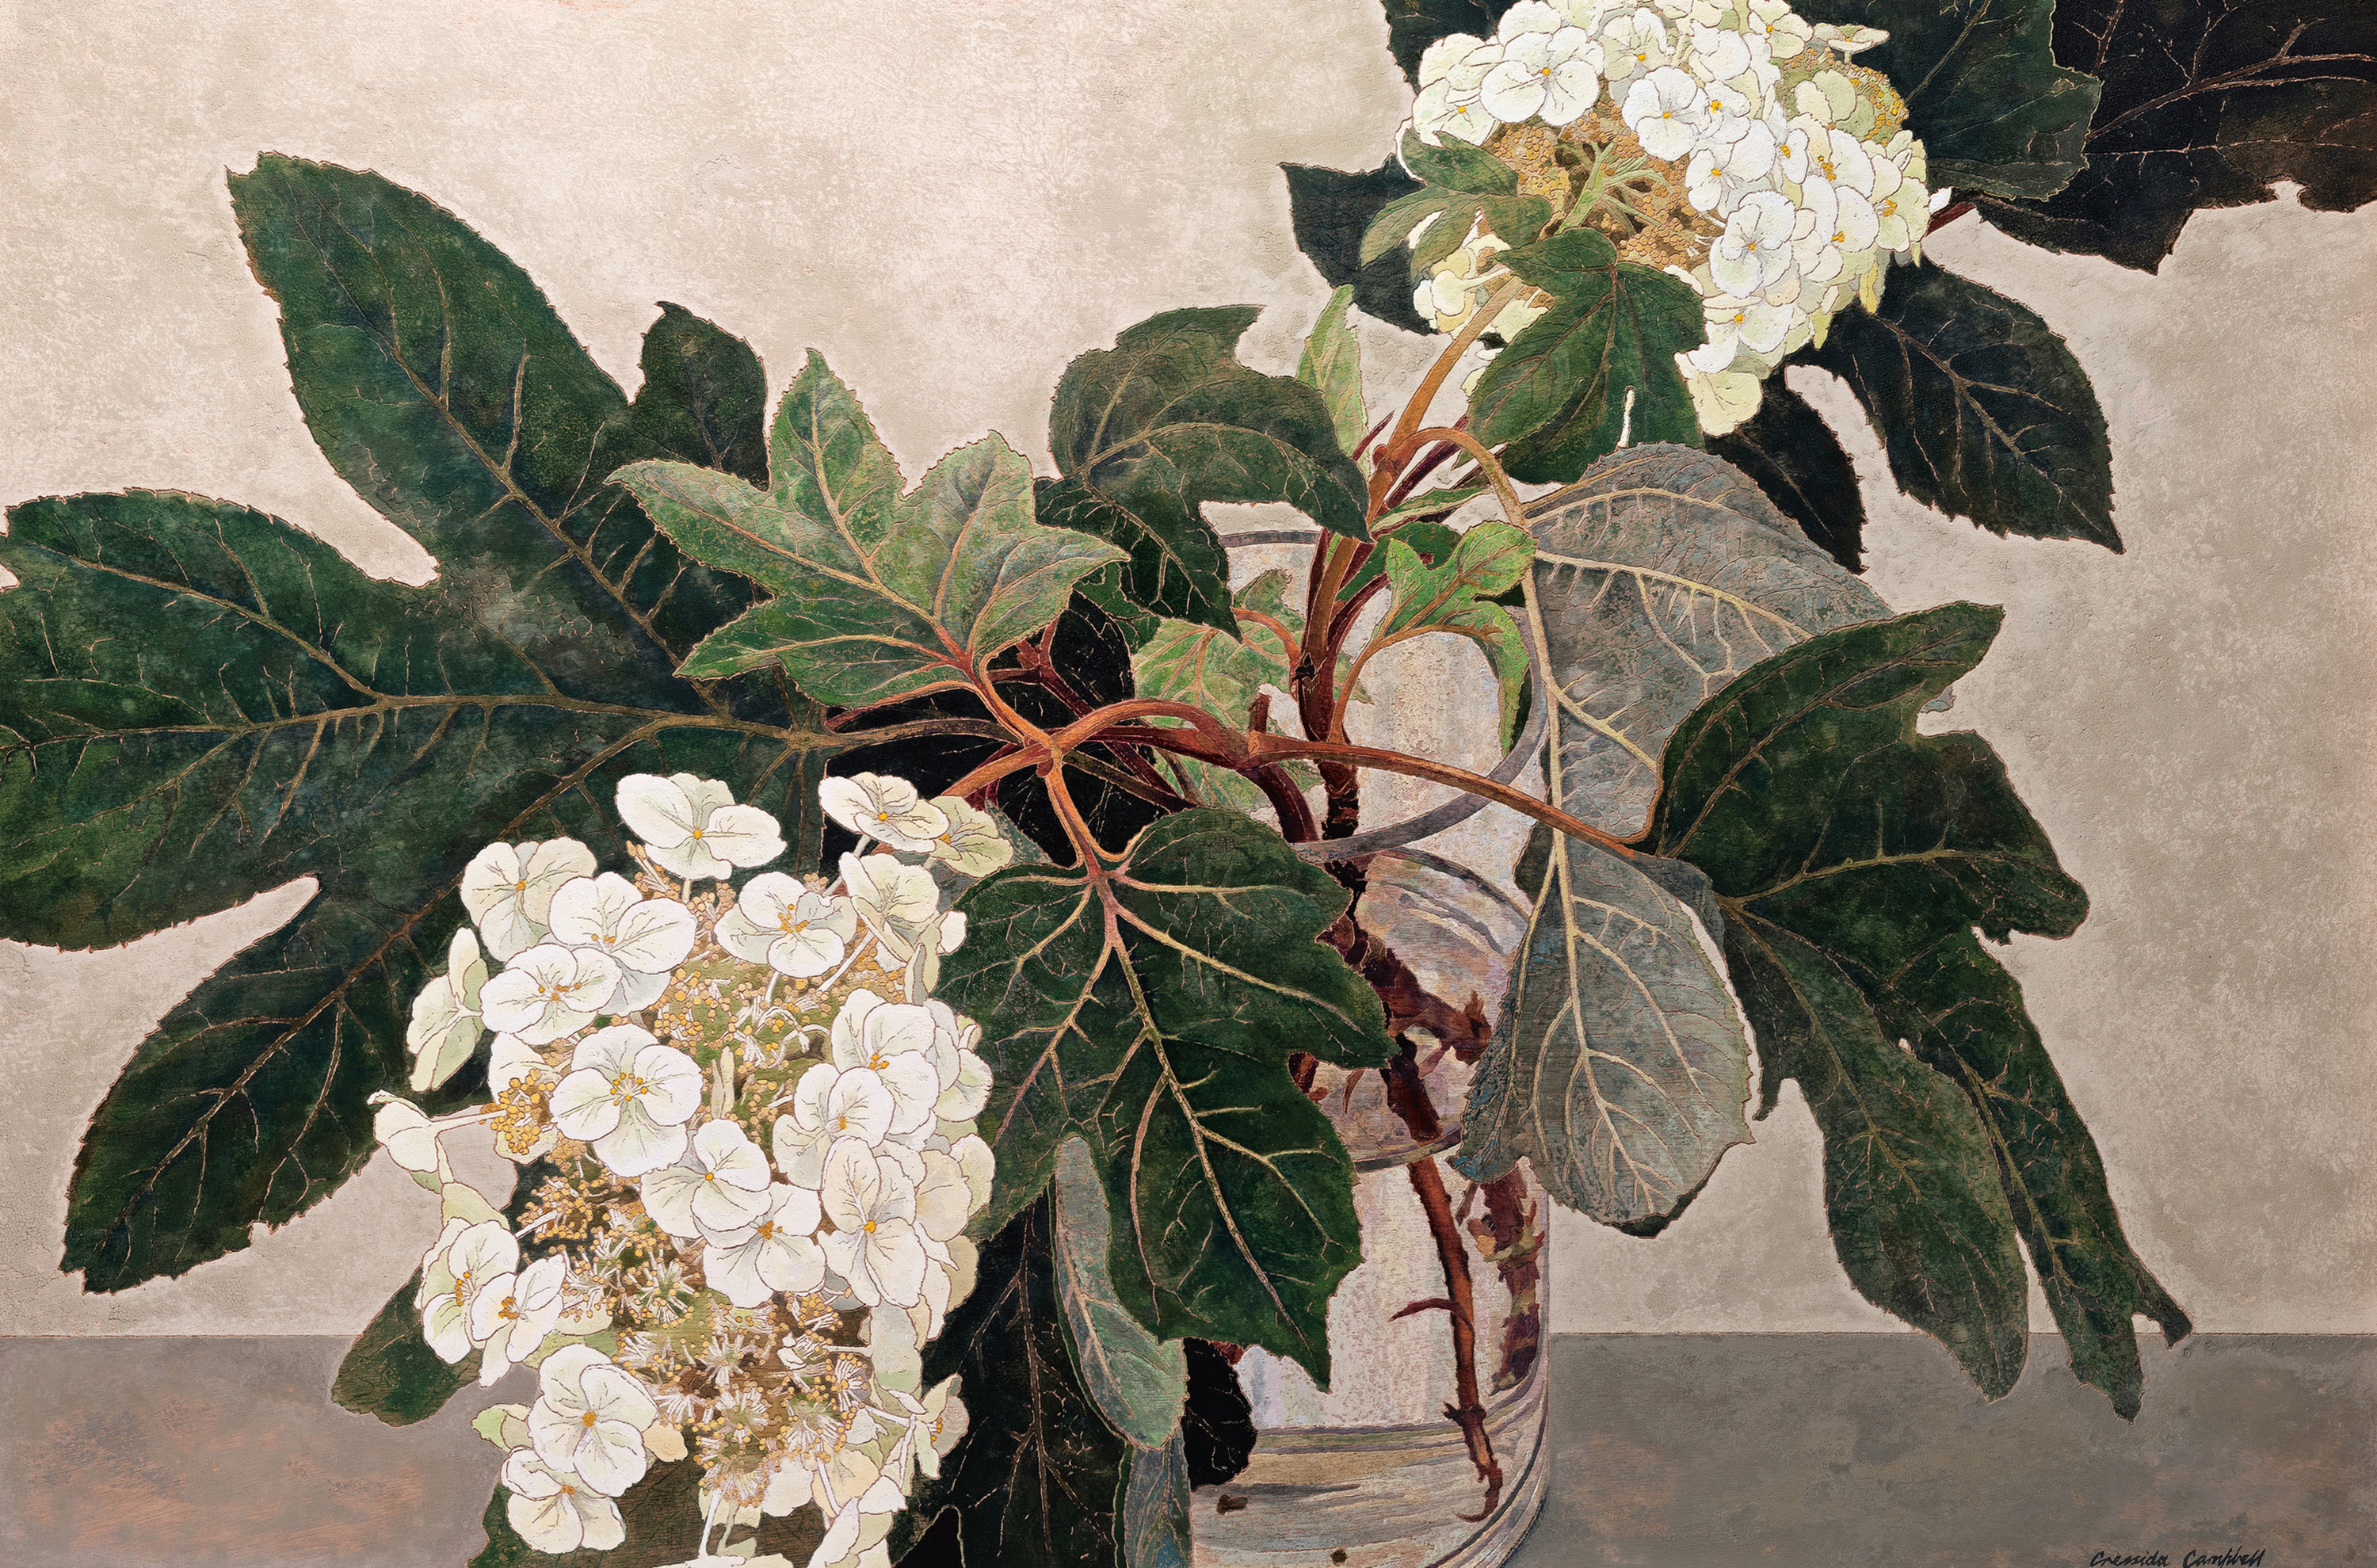 A painting of Japanese Hydrangea, a small white flower growing in clusters on a vine, in a jug of water